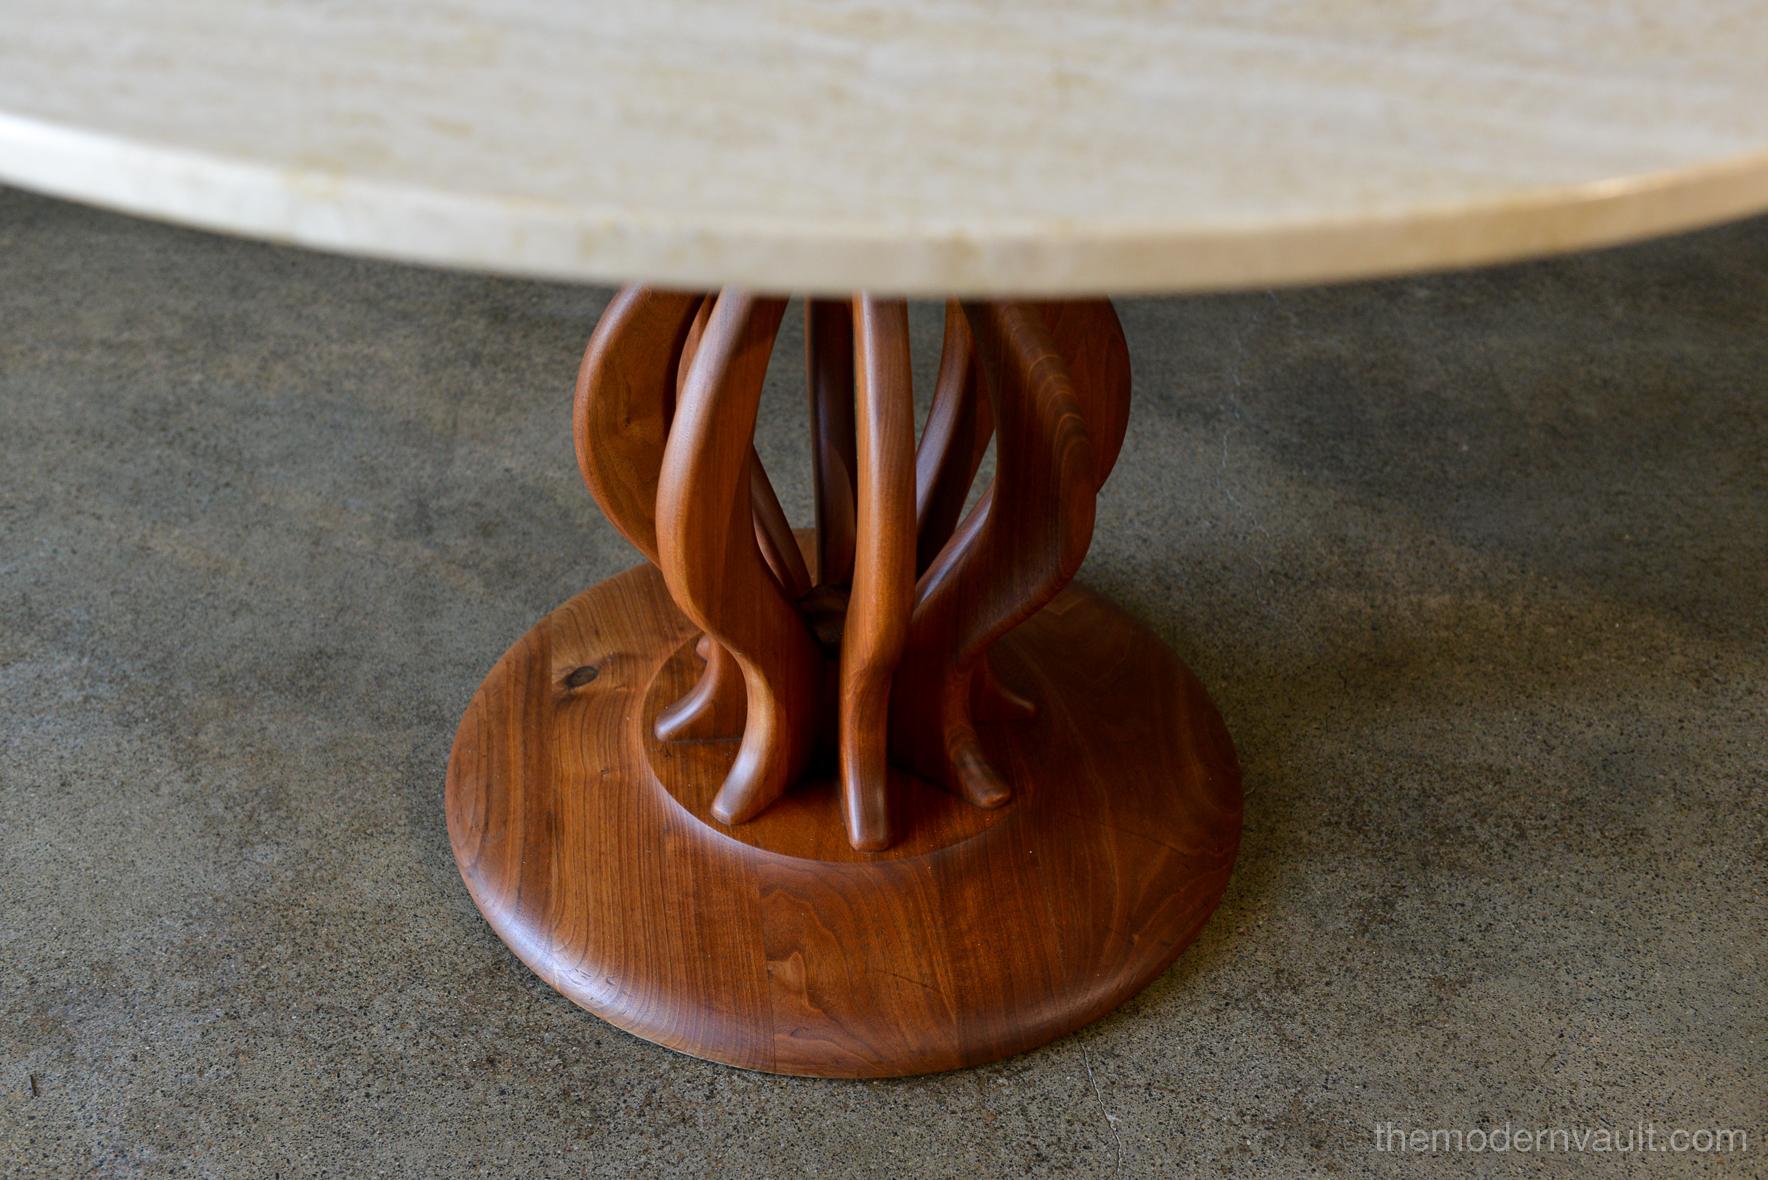 Travertine and sculpted walnut dining or bistro table, circa 1970. Beautiful sculpted walnut pedestal base with Italian travertine top in perfect condition. Absolutely no chips or cracks and walnut has beautiful color and grain. Could be used as a